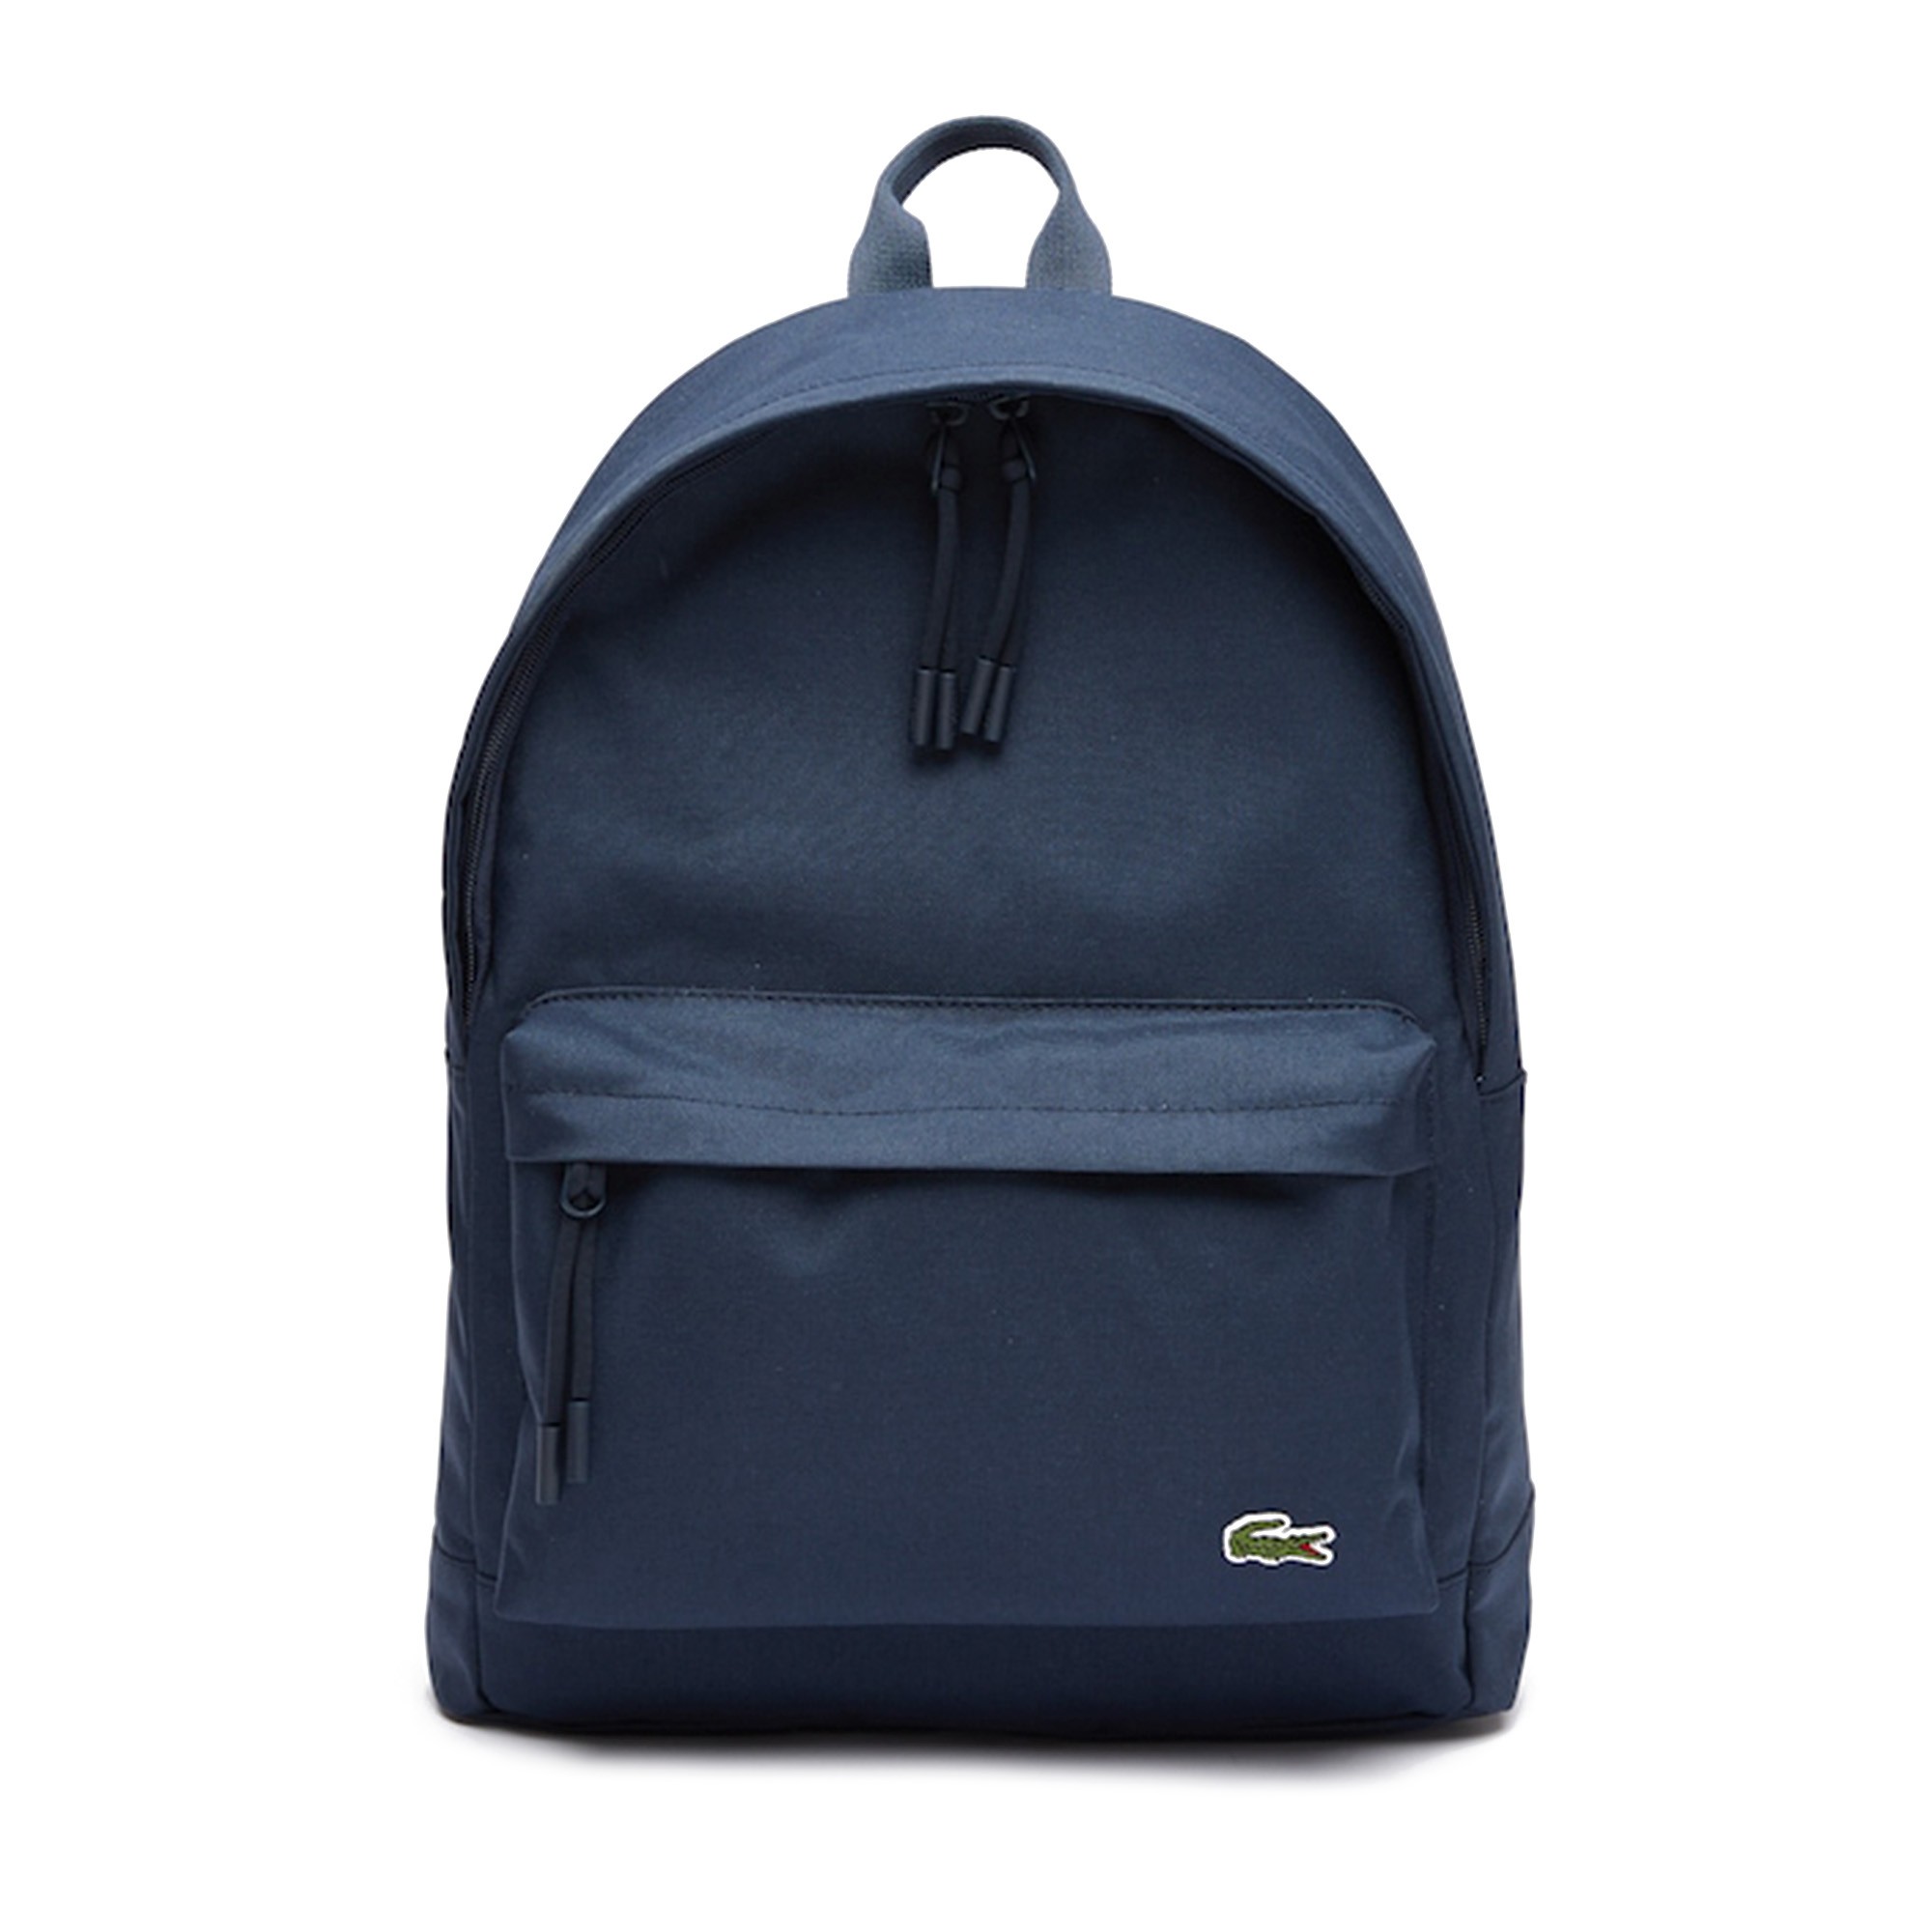 Lacoste Blue Backpacks, Bags & Briefcases for Men